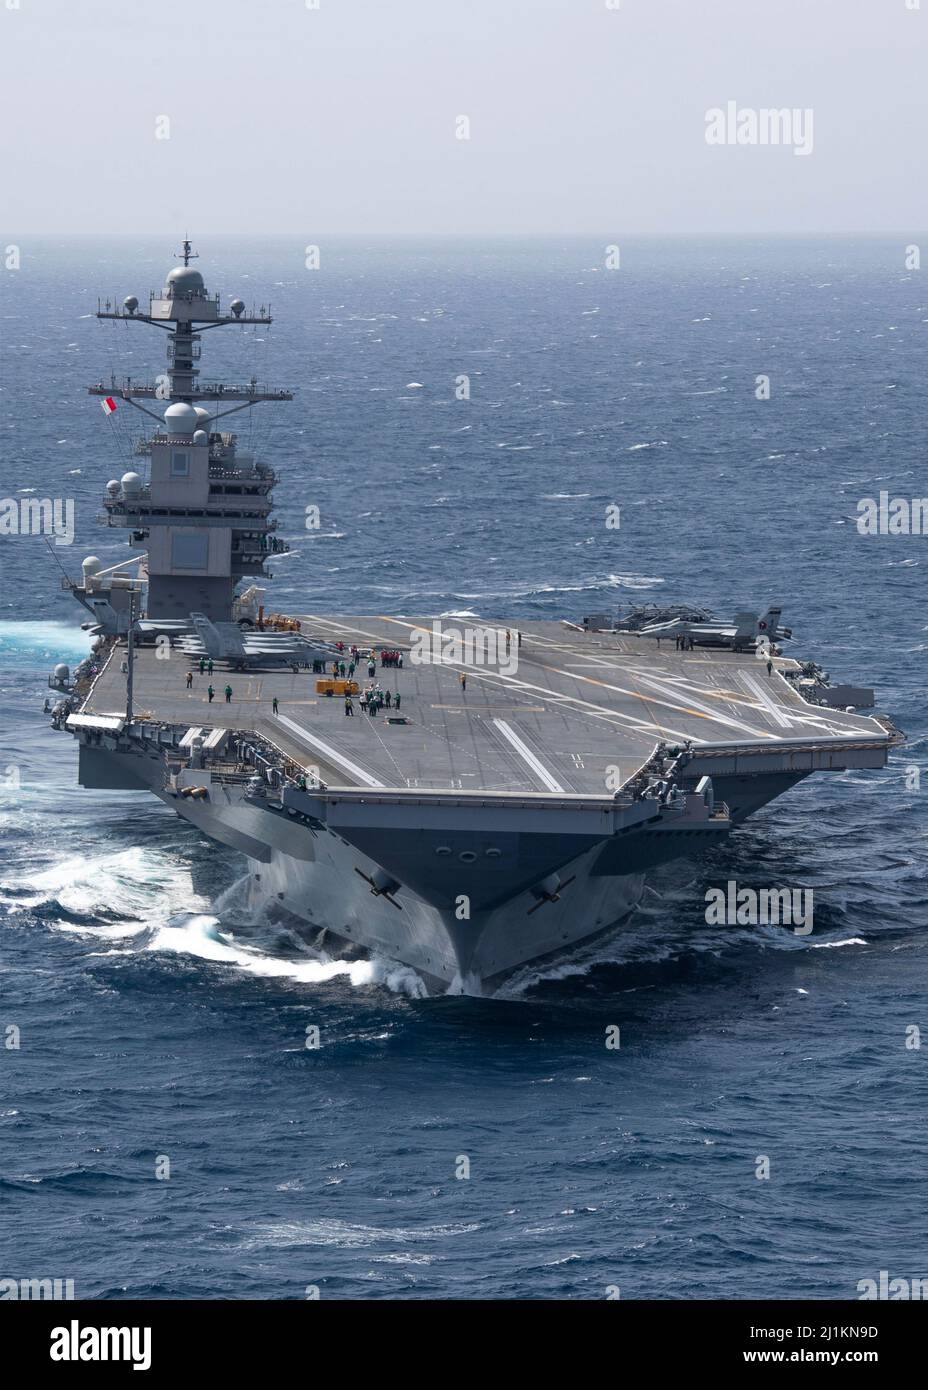 Atlantic Ocean, United States. 23 March, 2022. The U.S. Navy Ford-class aircraft carrier USS Gerald R. Ford underway during flight deck certification and air wing carrier qualifications, March 23, 2022 in the Atlantic Ocean.  Credit: MC3 Jackson Adkins/Planetpix/Alamy Live News Stock Photo